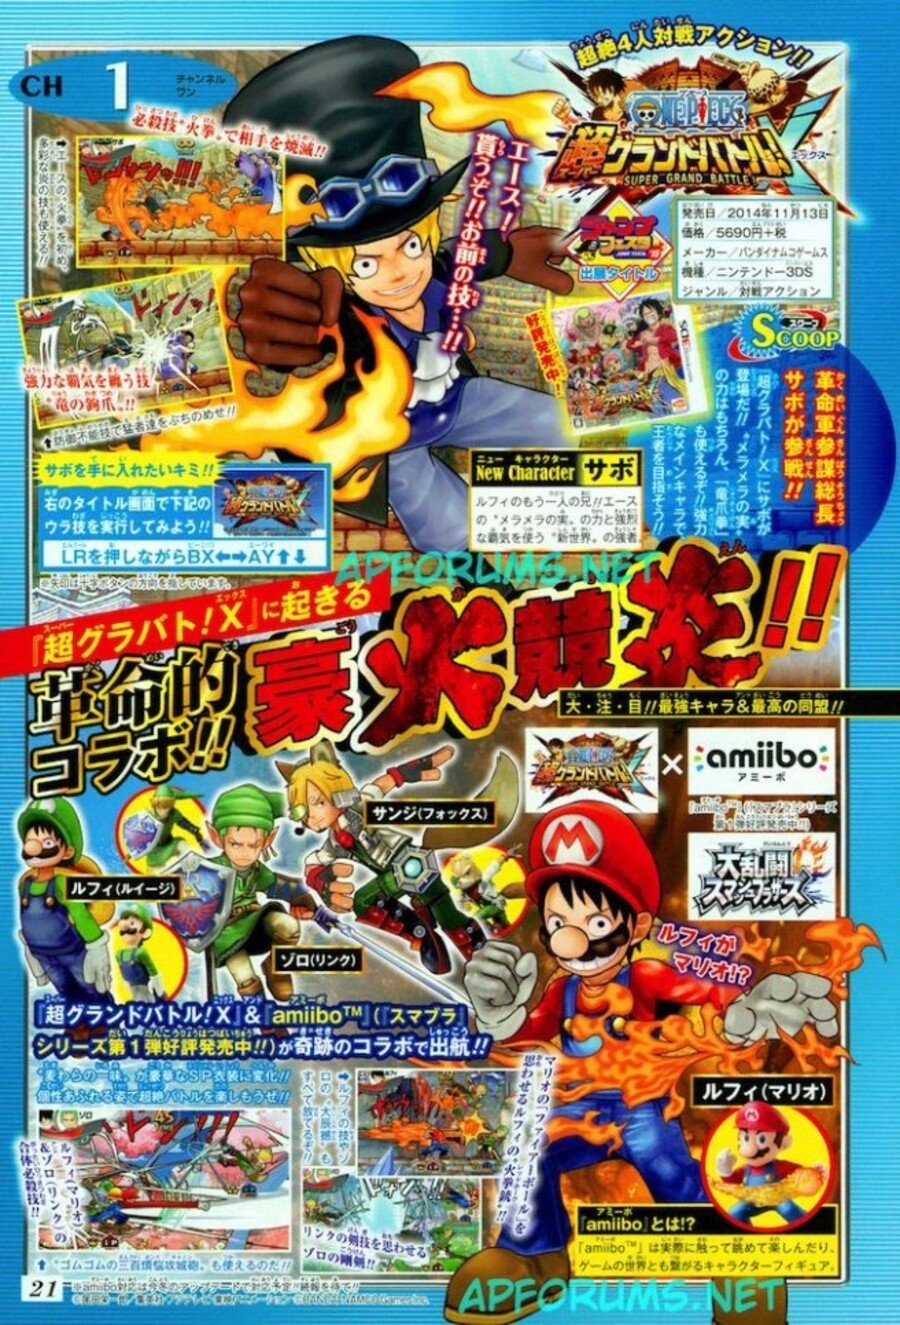 3ds Brawler One Piece Super Grand Battle X Is Getting Amiibo Support Nintendo Life